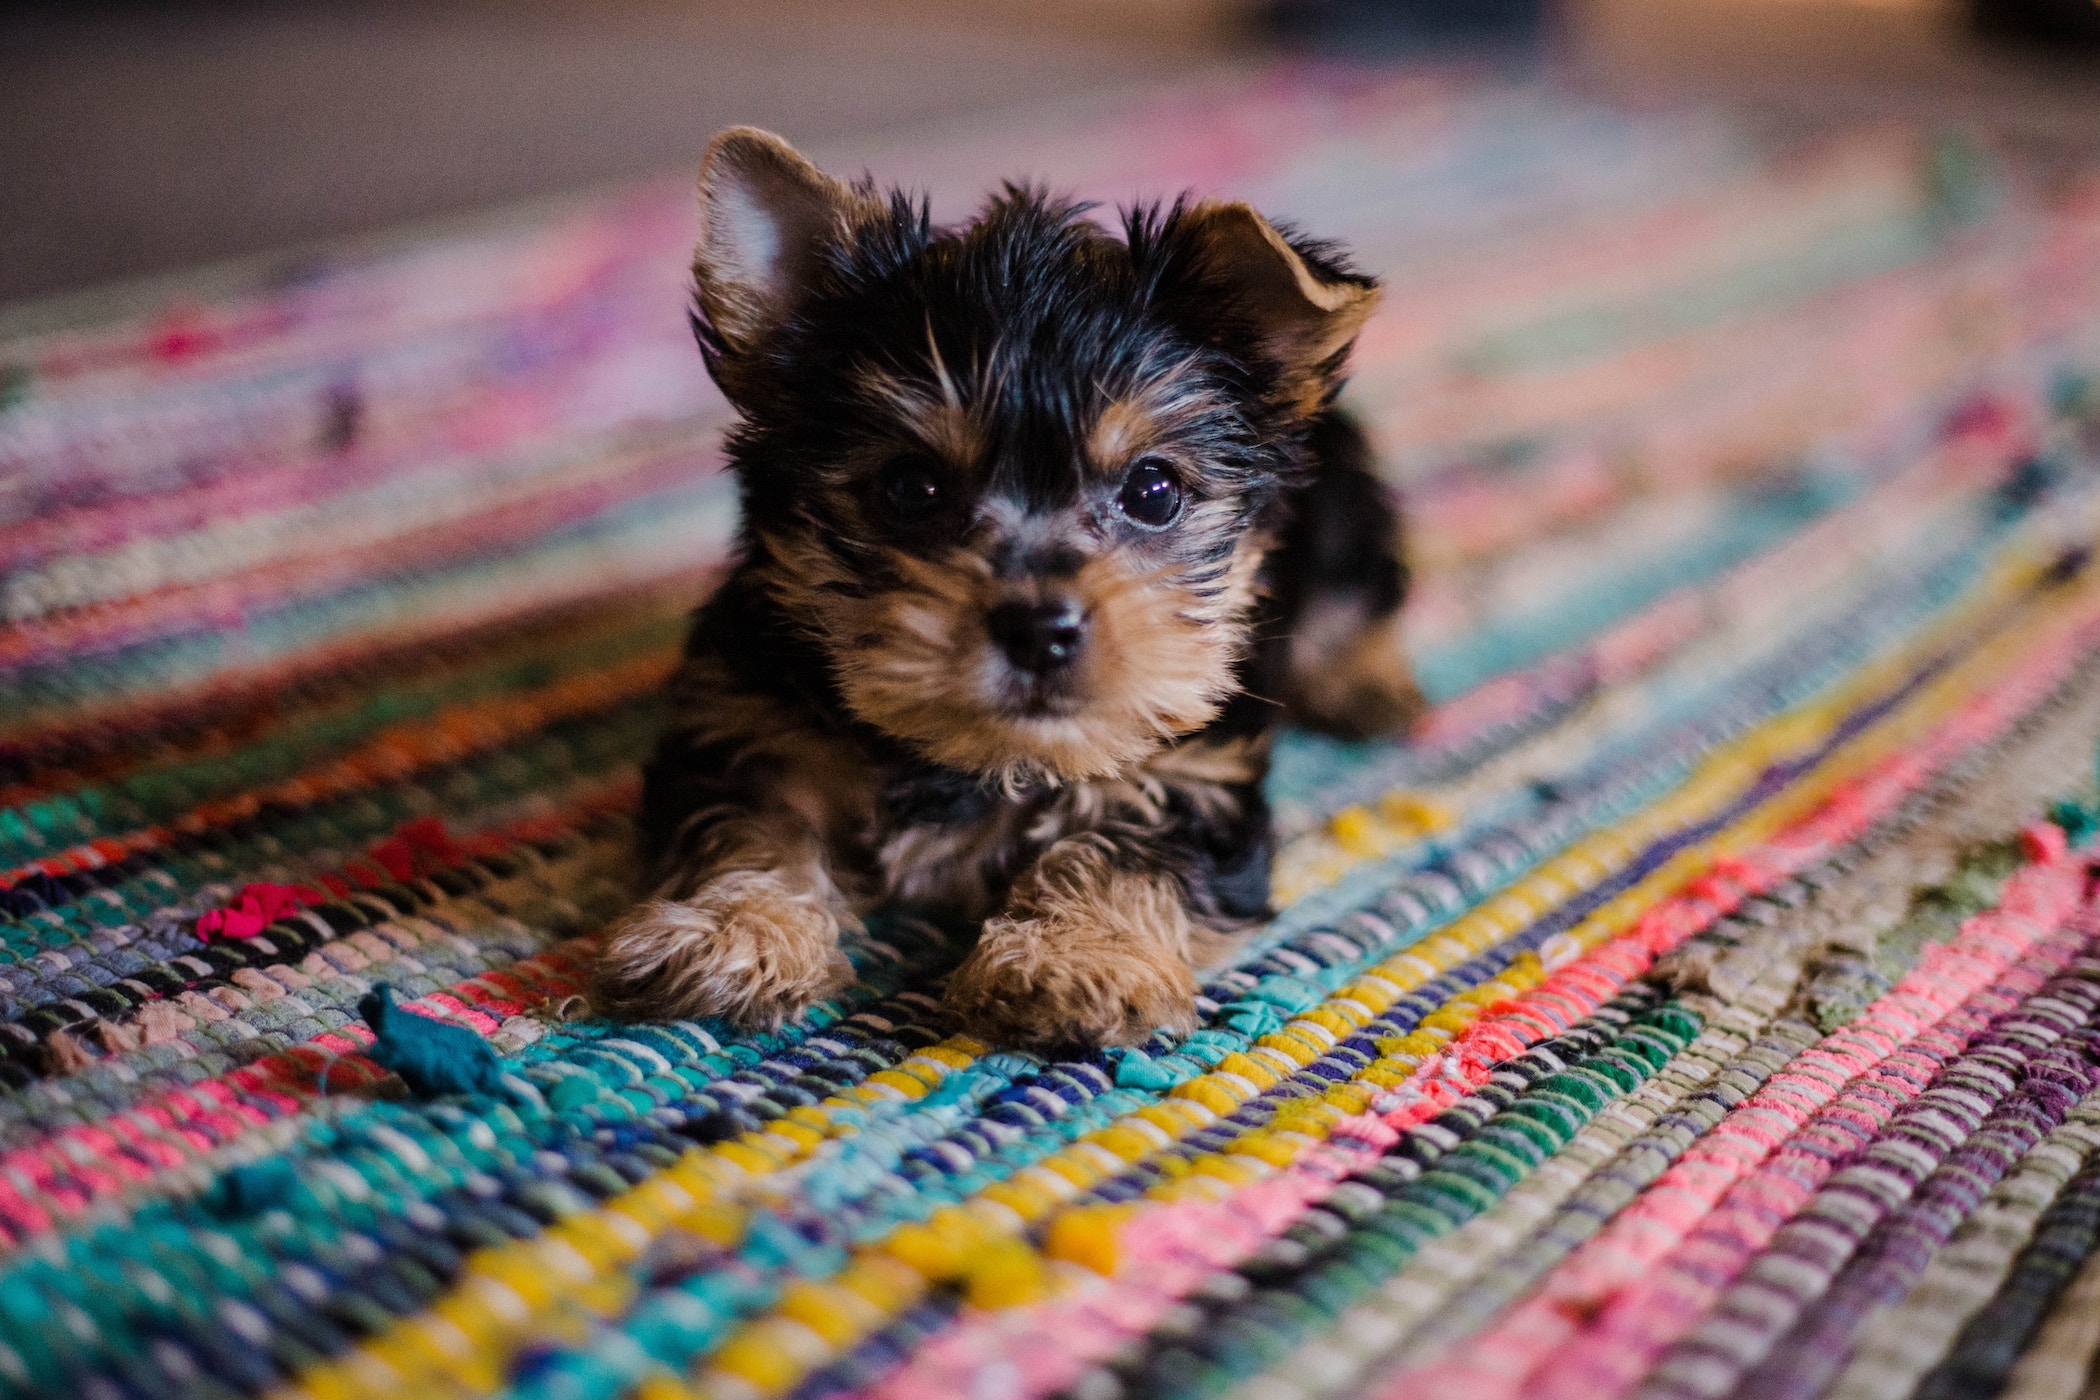 Puppy on a rug in a home